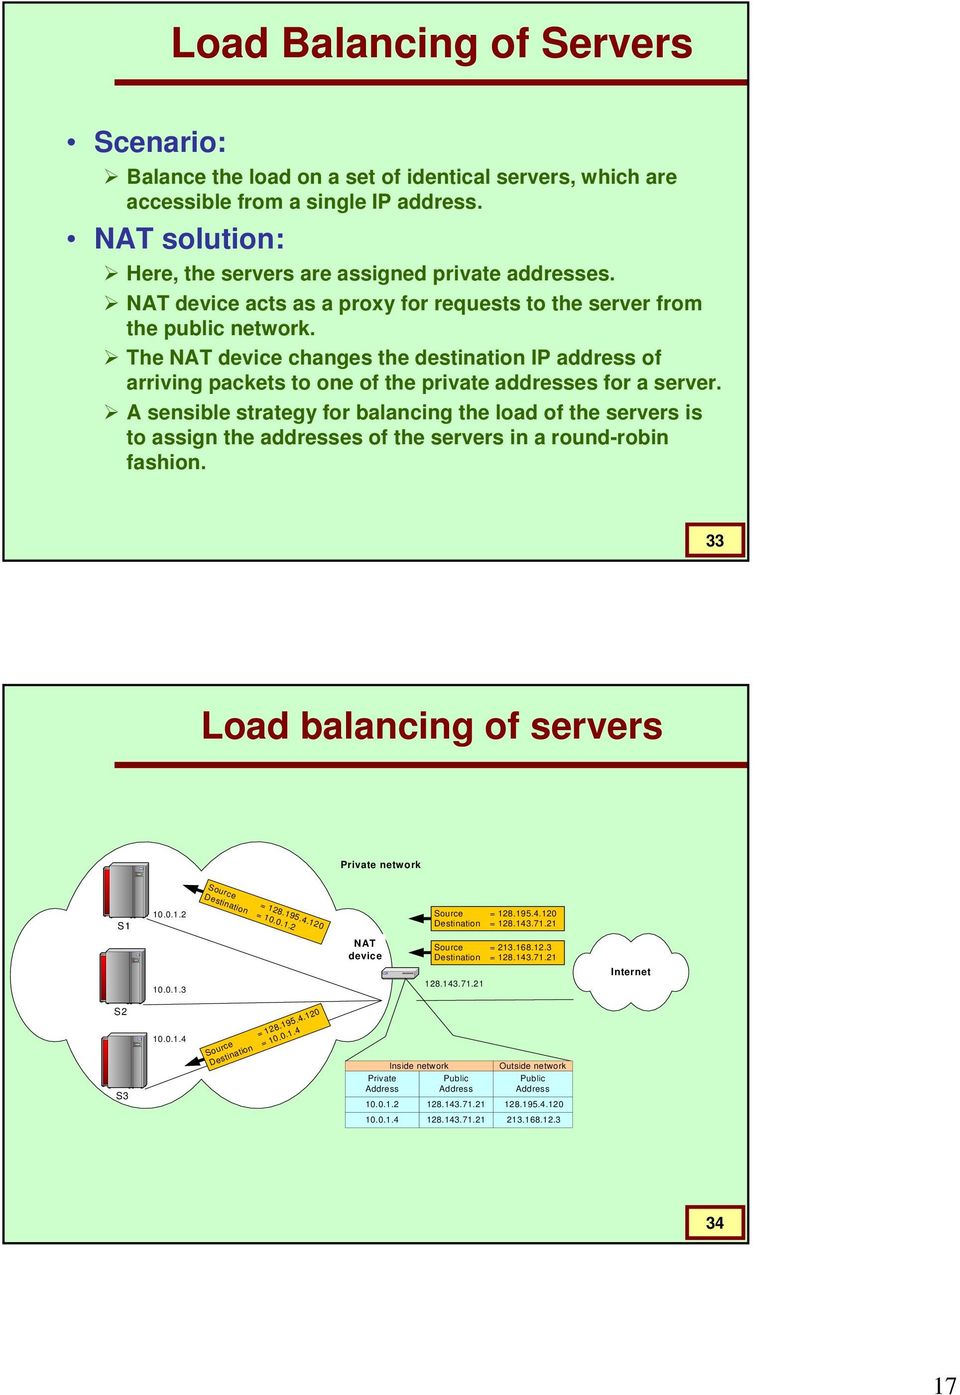 A sensible strategy for balancing the load of the servers is to assign the addresses of the servers in a round-robin fashion. 33 Load balancing of servers Private network Source = 128.195.4.